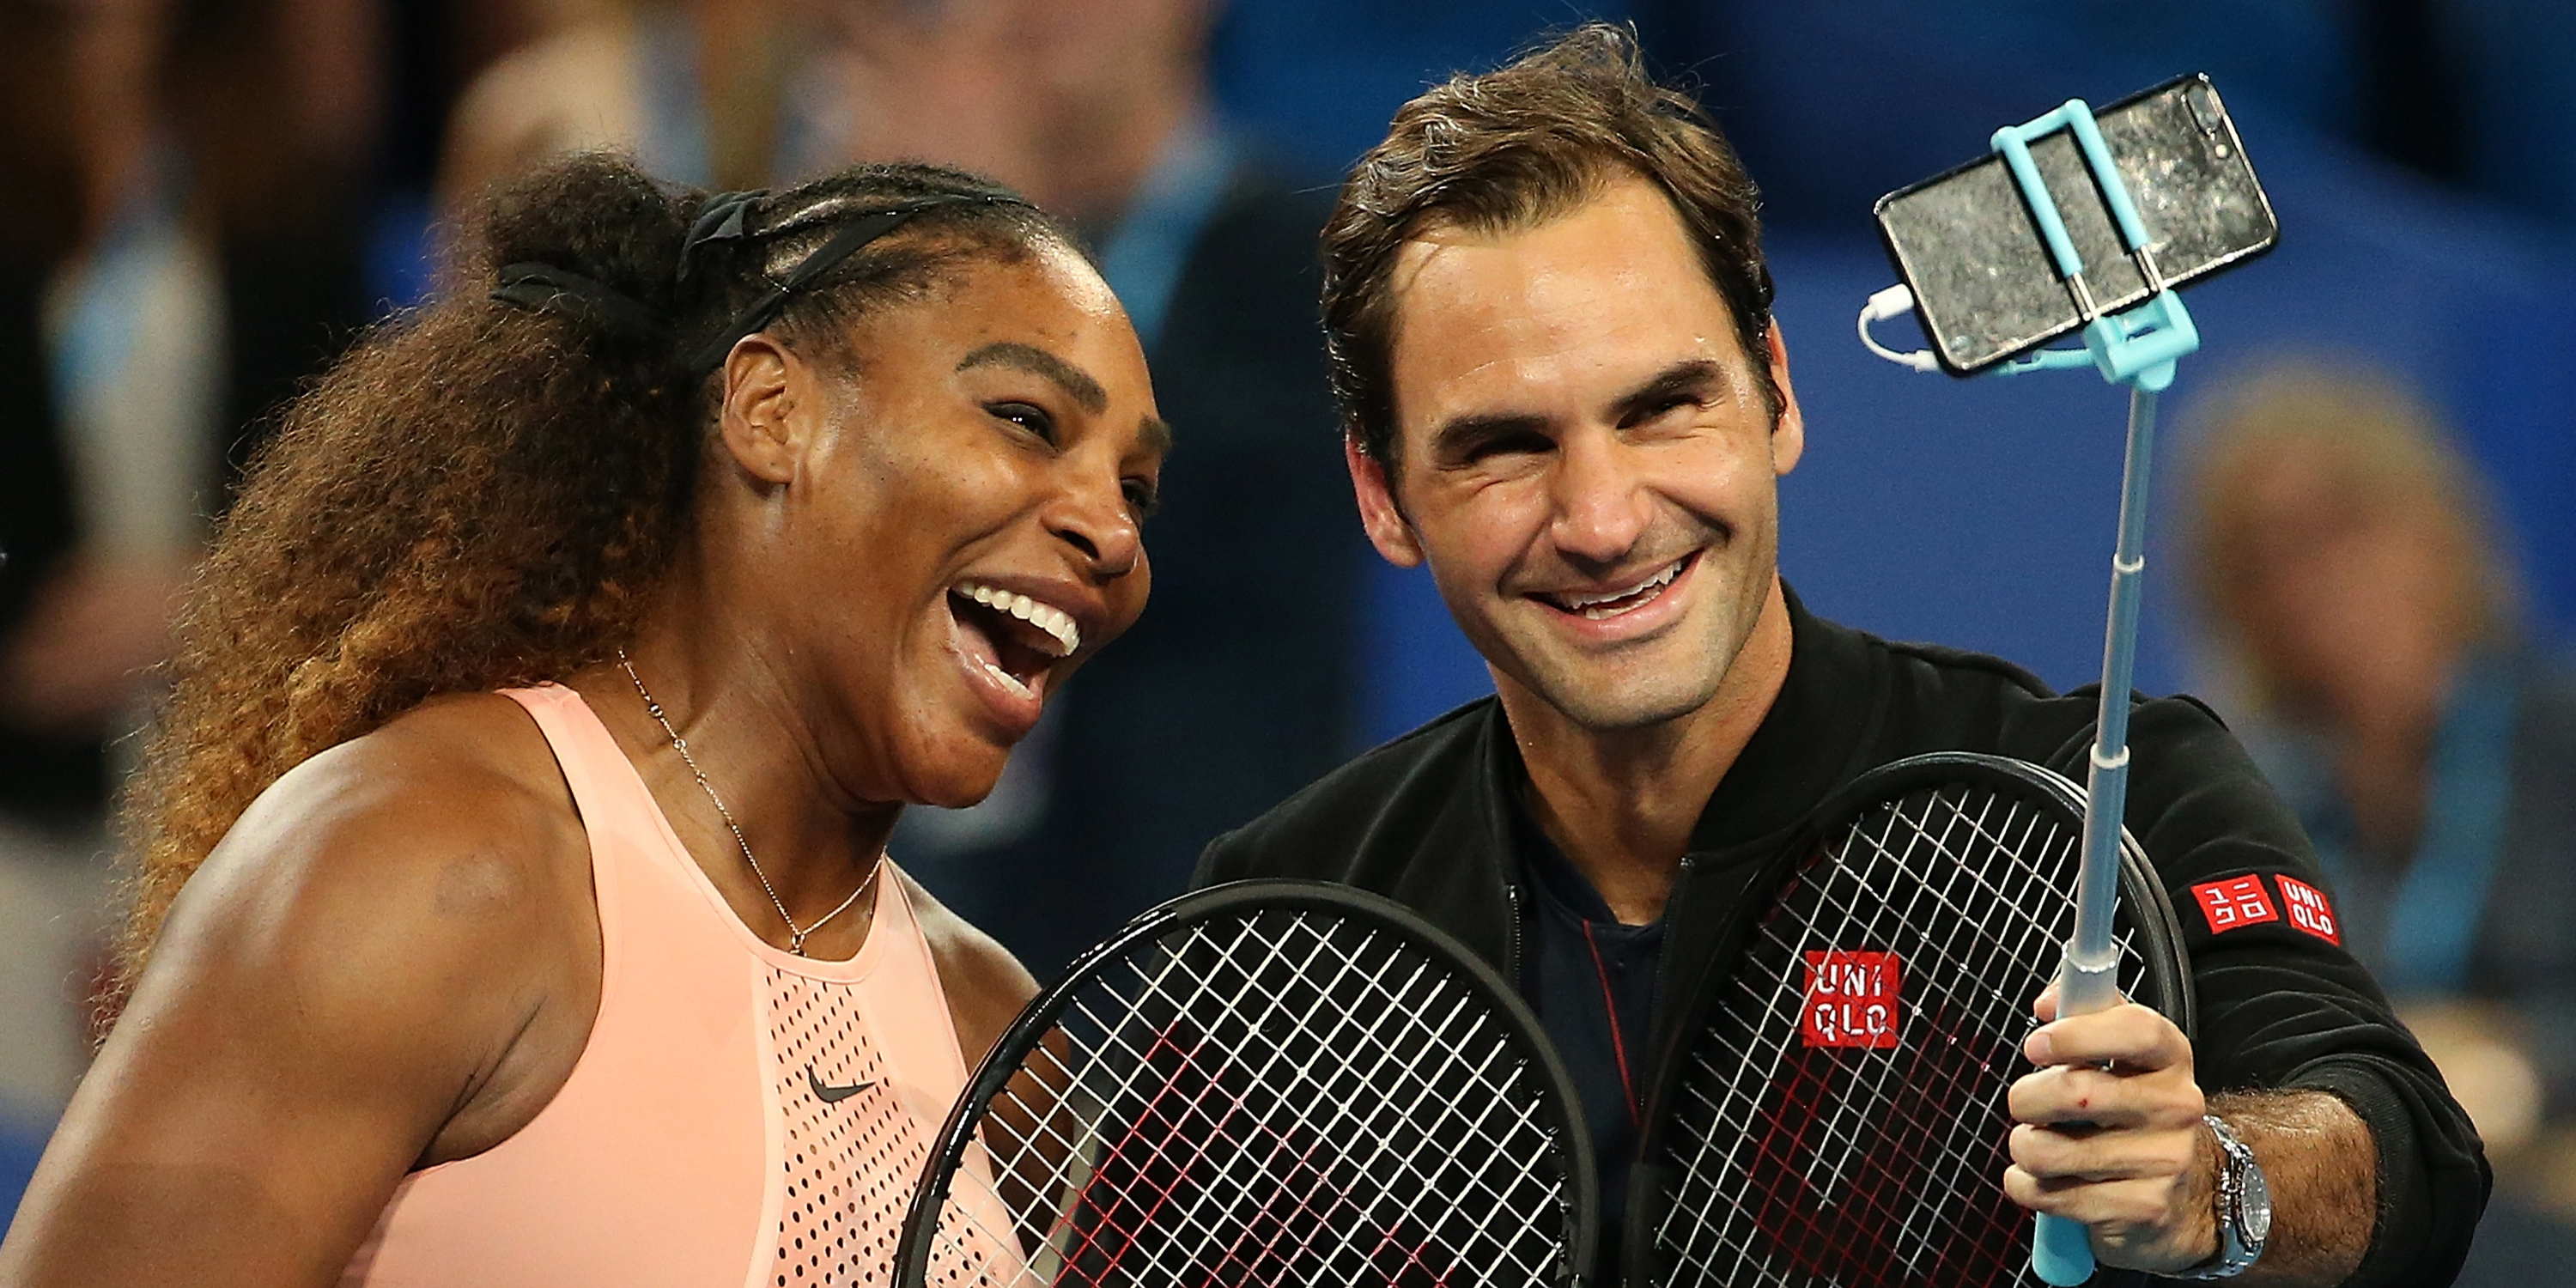 Roger Federer's moving interview with fellow tennis legend Serena Williams